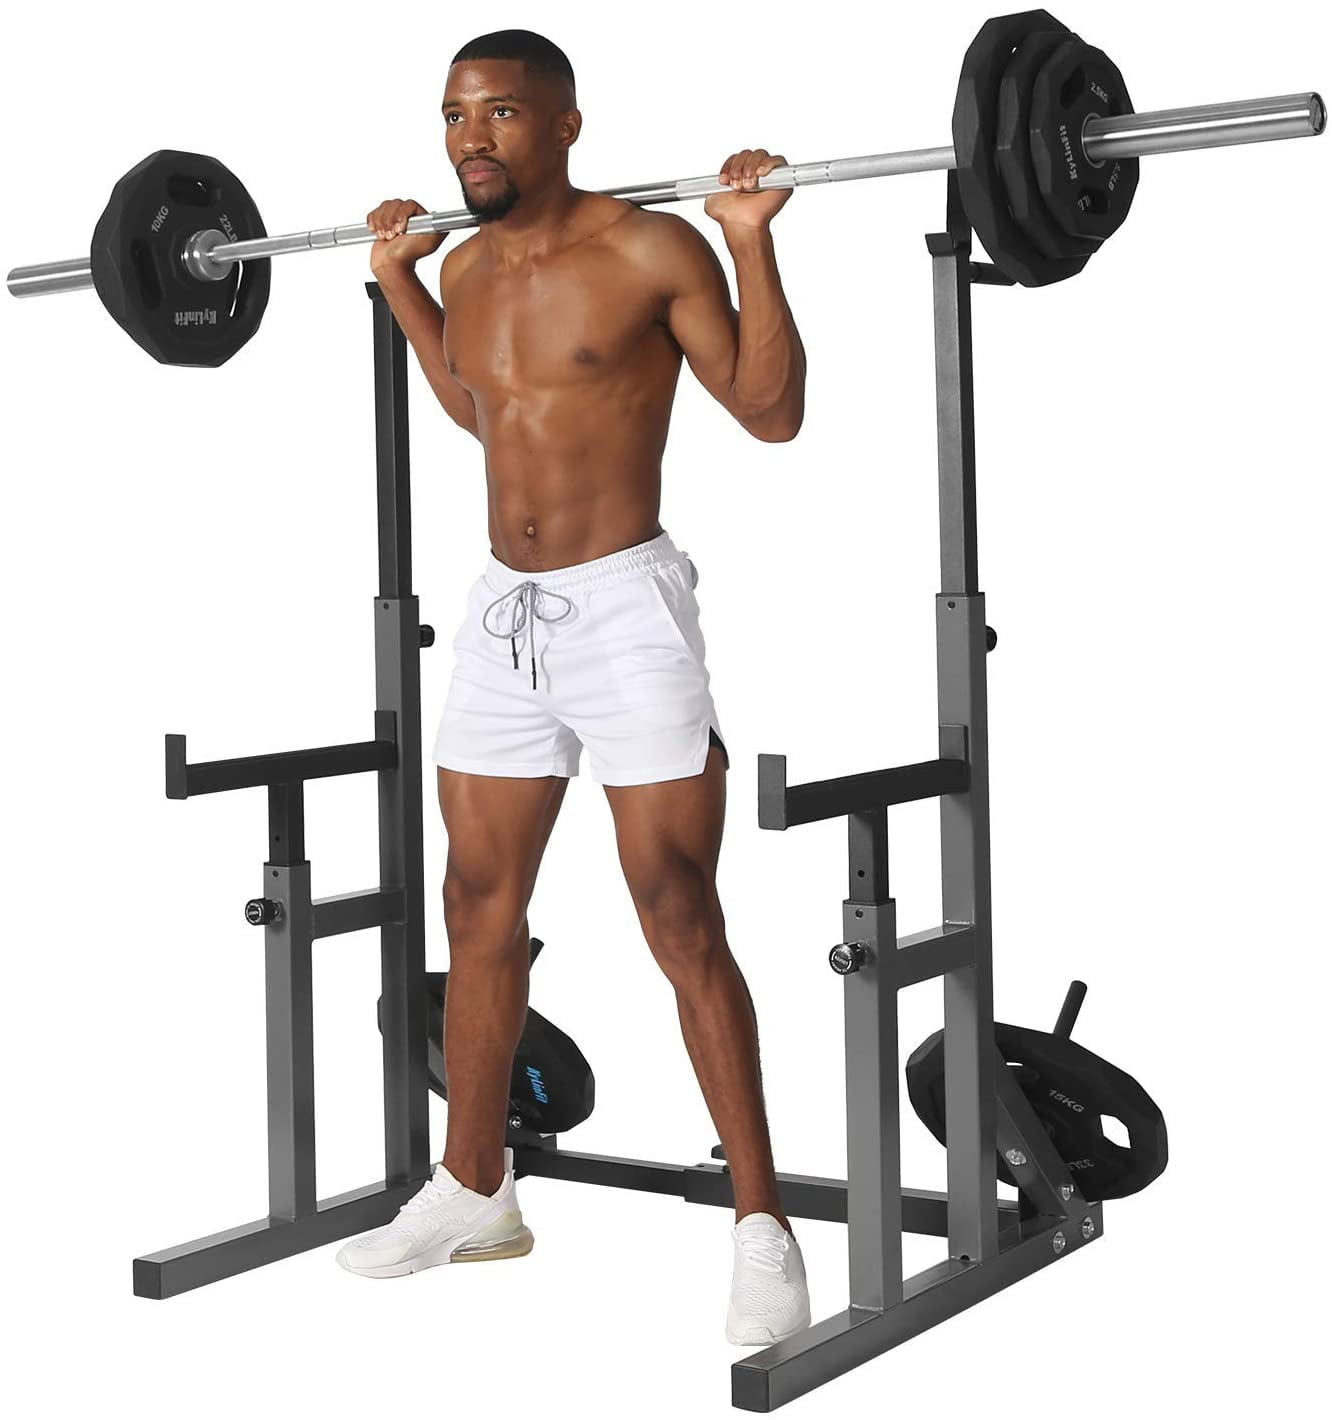 Gym Adjustable Squat Rack Dip Stand Barbell Power Lifting Weight Bench Fitness 